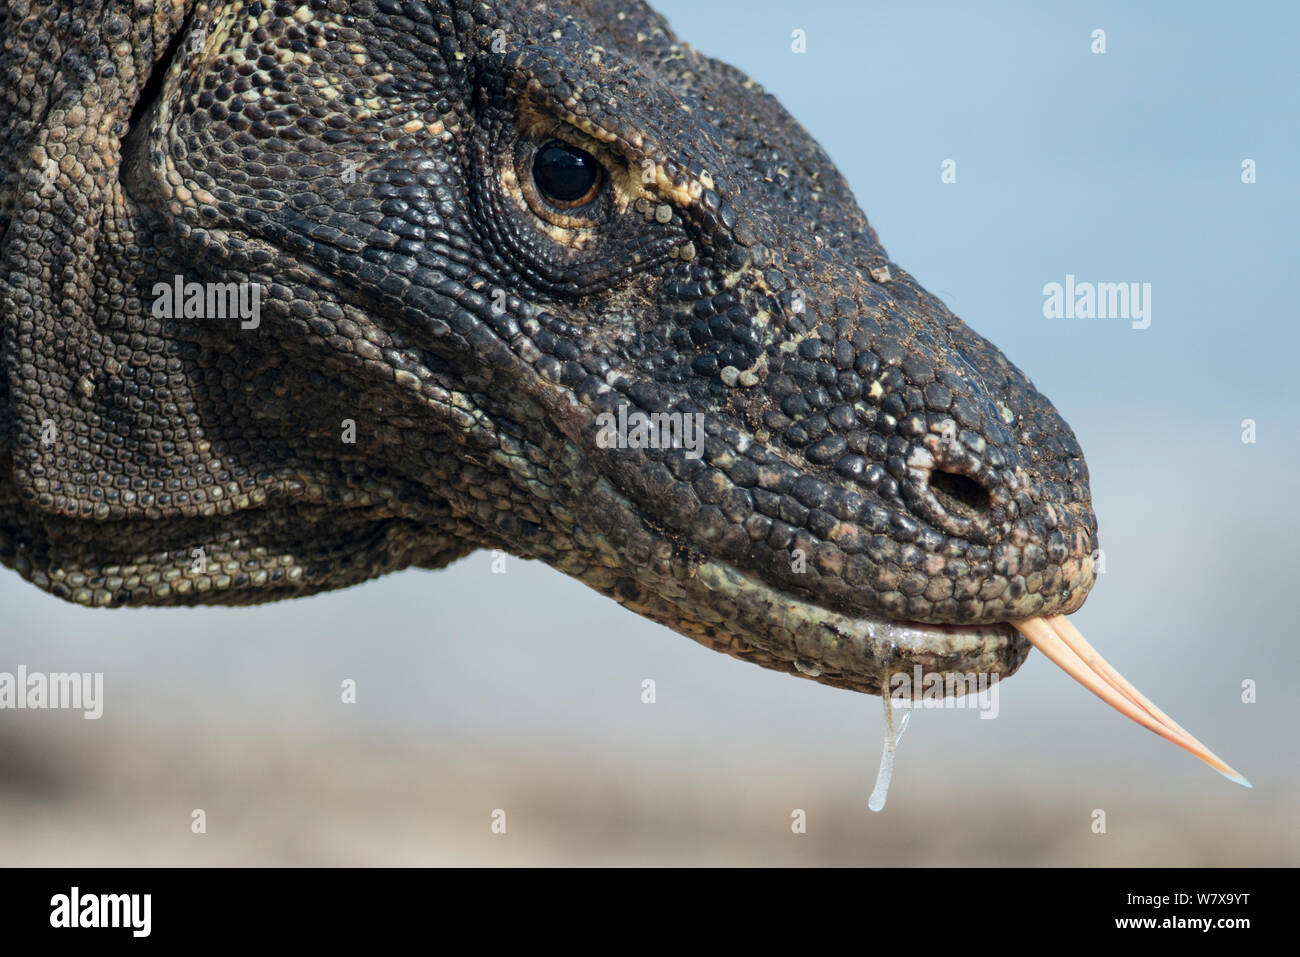 Close-up of Komodo Dragon (Varanus komodoensis) face with tongue out and saliva dripping from its mouth, Komodo National Park, Indonesia. Stock Photo